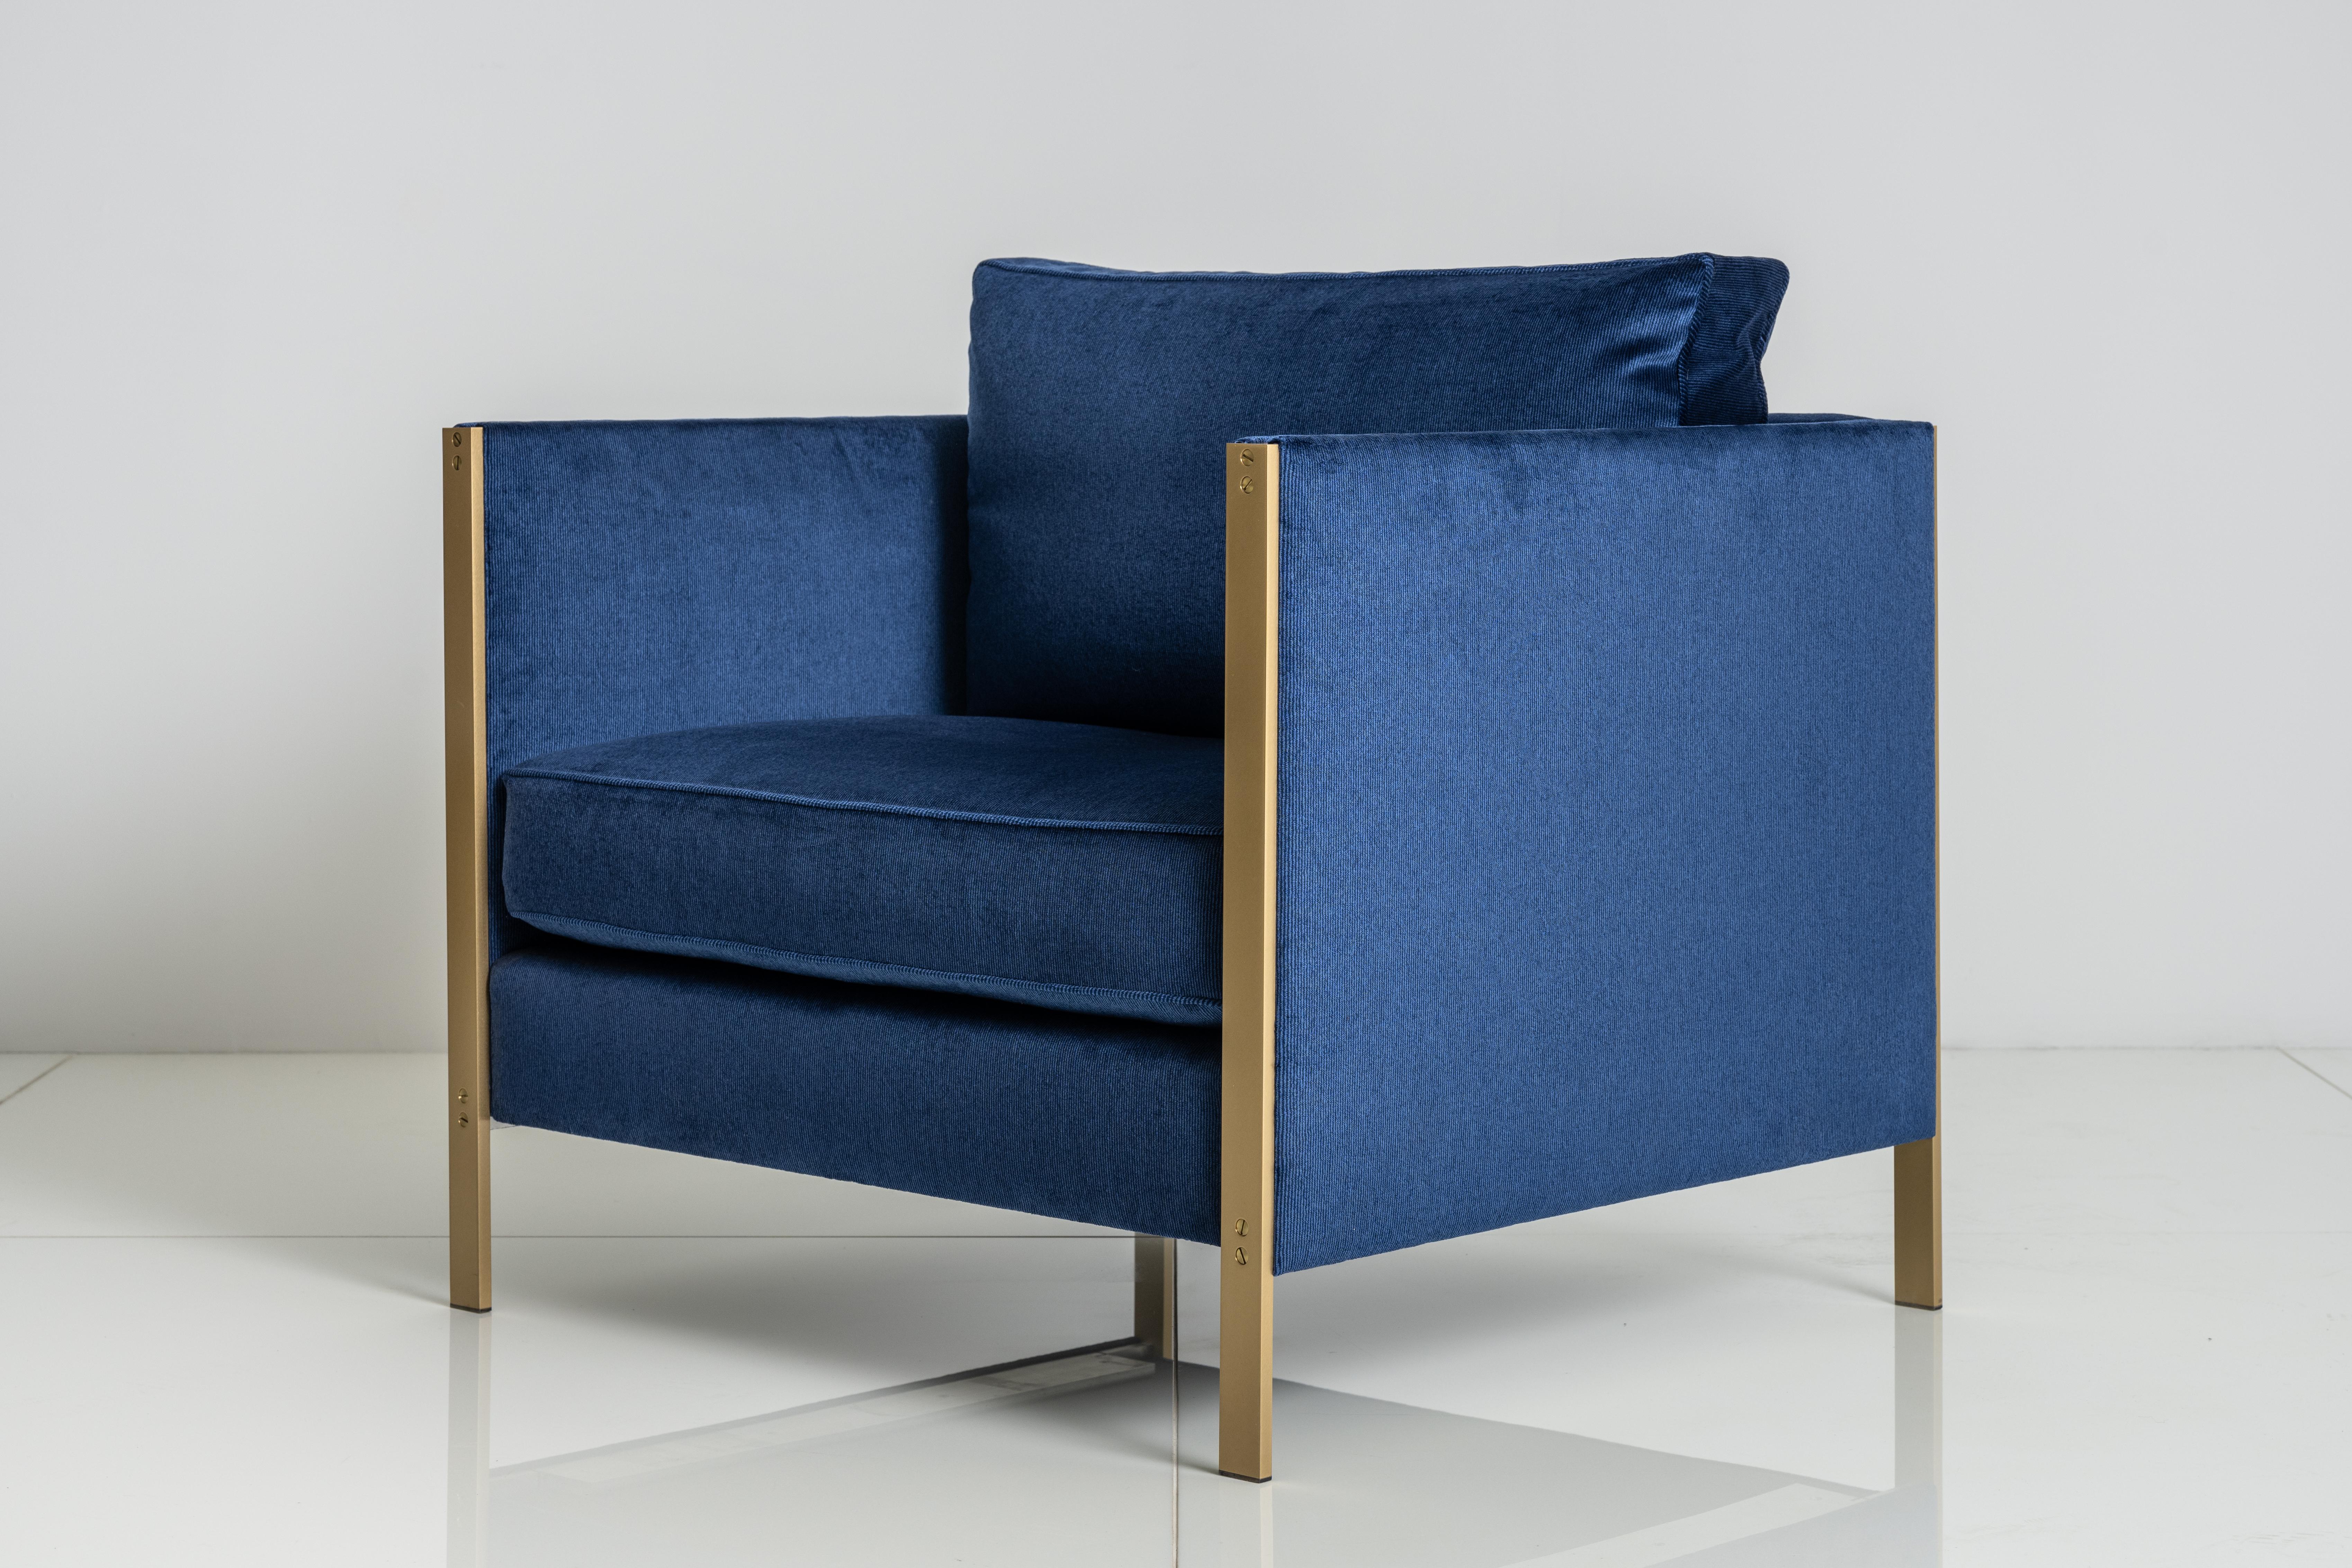 The architectural rigor of the Armstrong Armchair's mechanically fastened, metal frame forms a striking juxtaposition to the generously proportioned, down-filled seat and back cushions.

Shown with a Solid Brass frame and Navy Corduroy.

W 36” x D